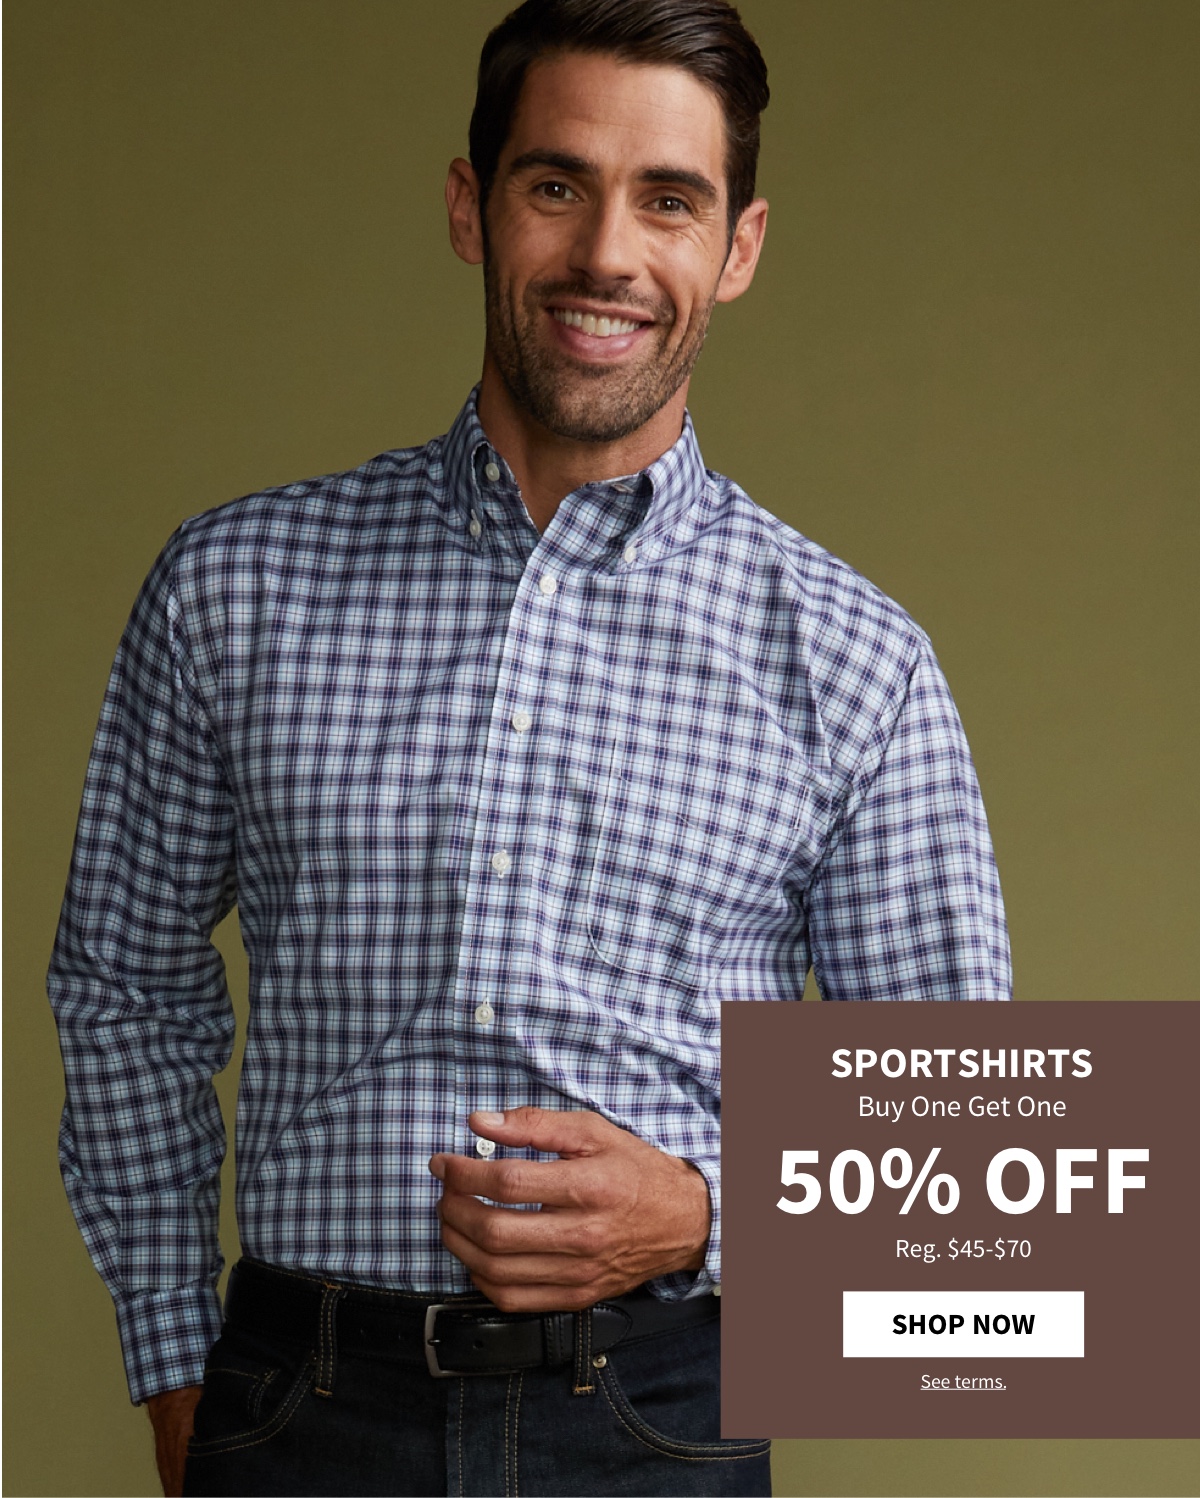 man smiling wearing a sportshirt, hand on stomach Sportshirts Buy One Get One 50% off Shop Now  e - 7 W o4 # L i e L T awmu g SPORTSHIRTS Buy One Get One 50% OFF Reg. $45-$70 